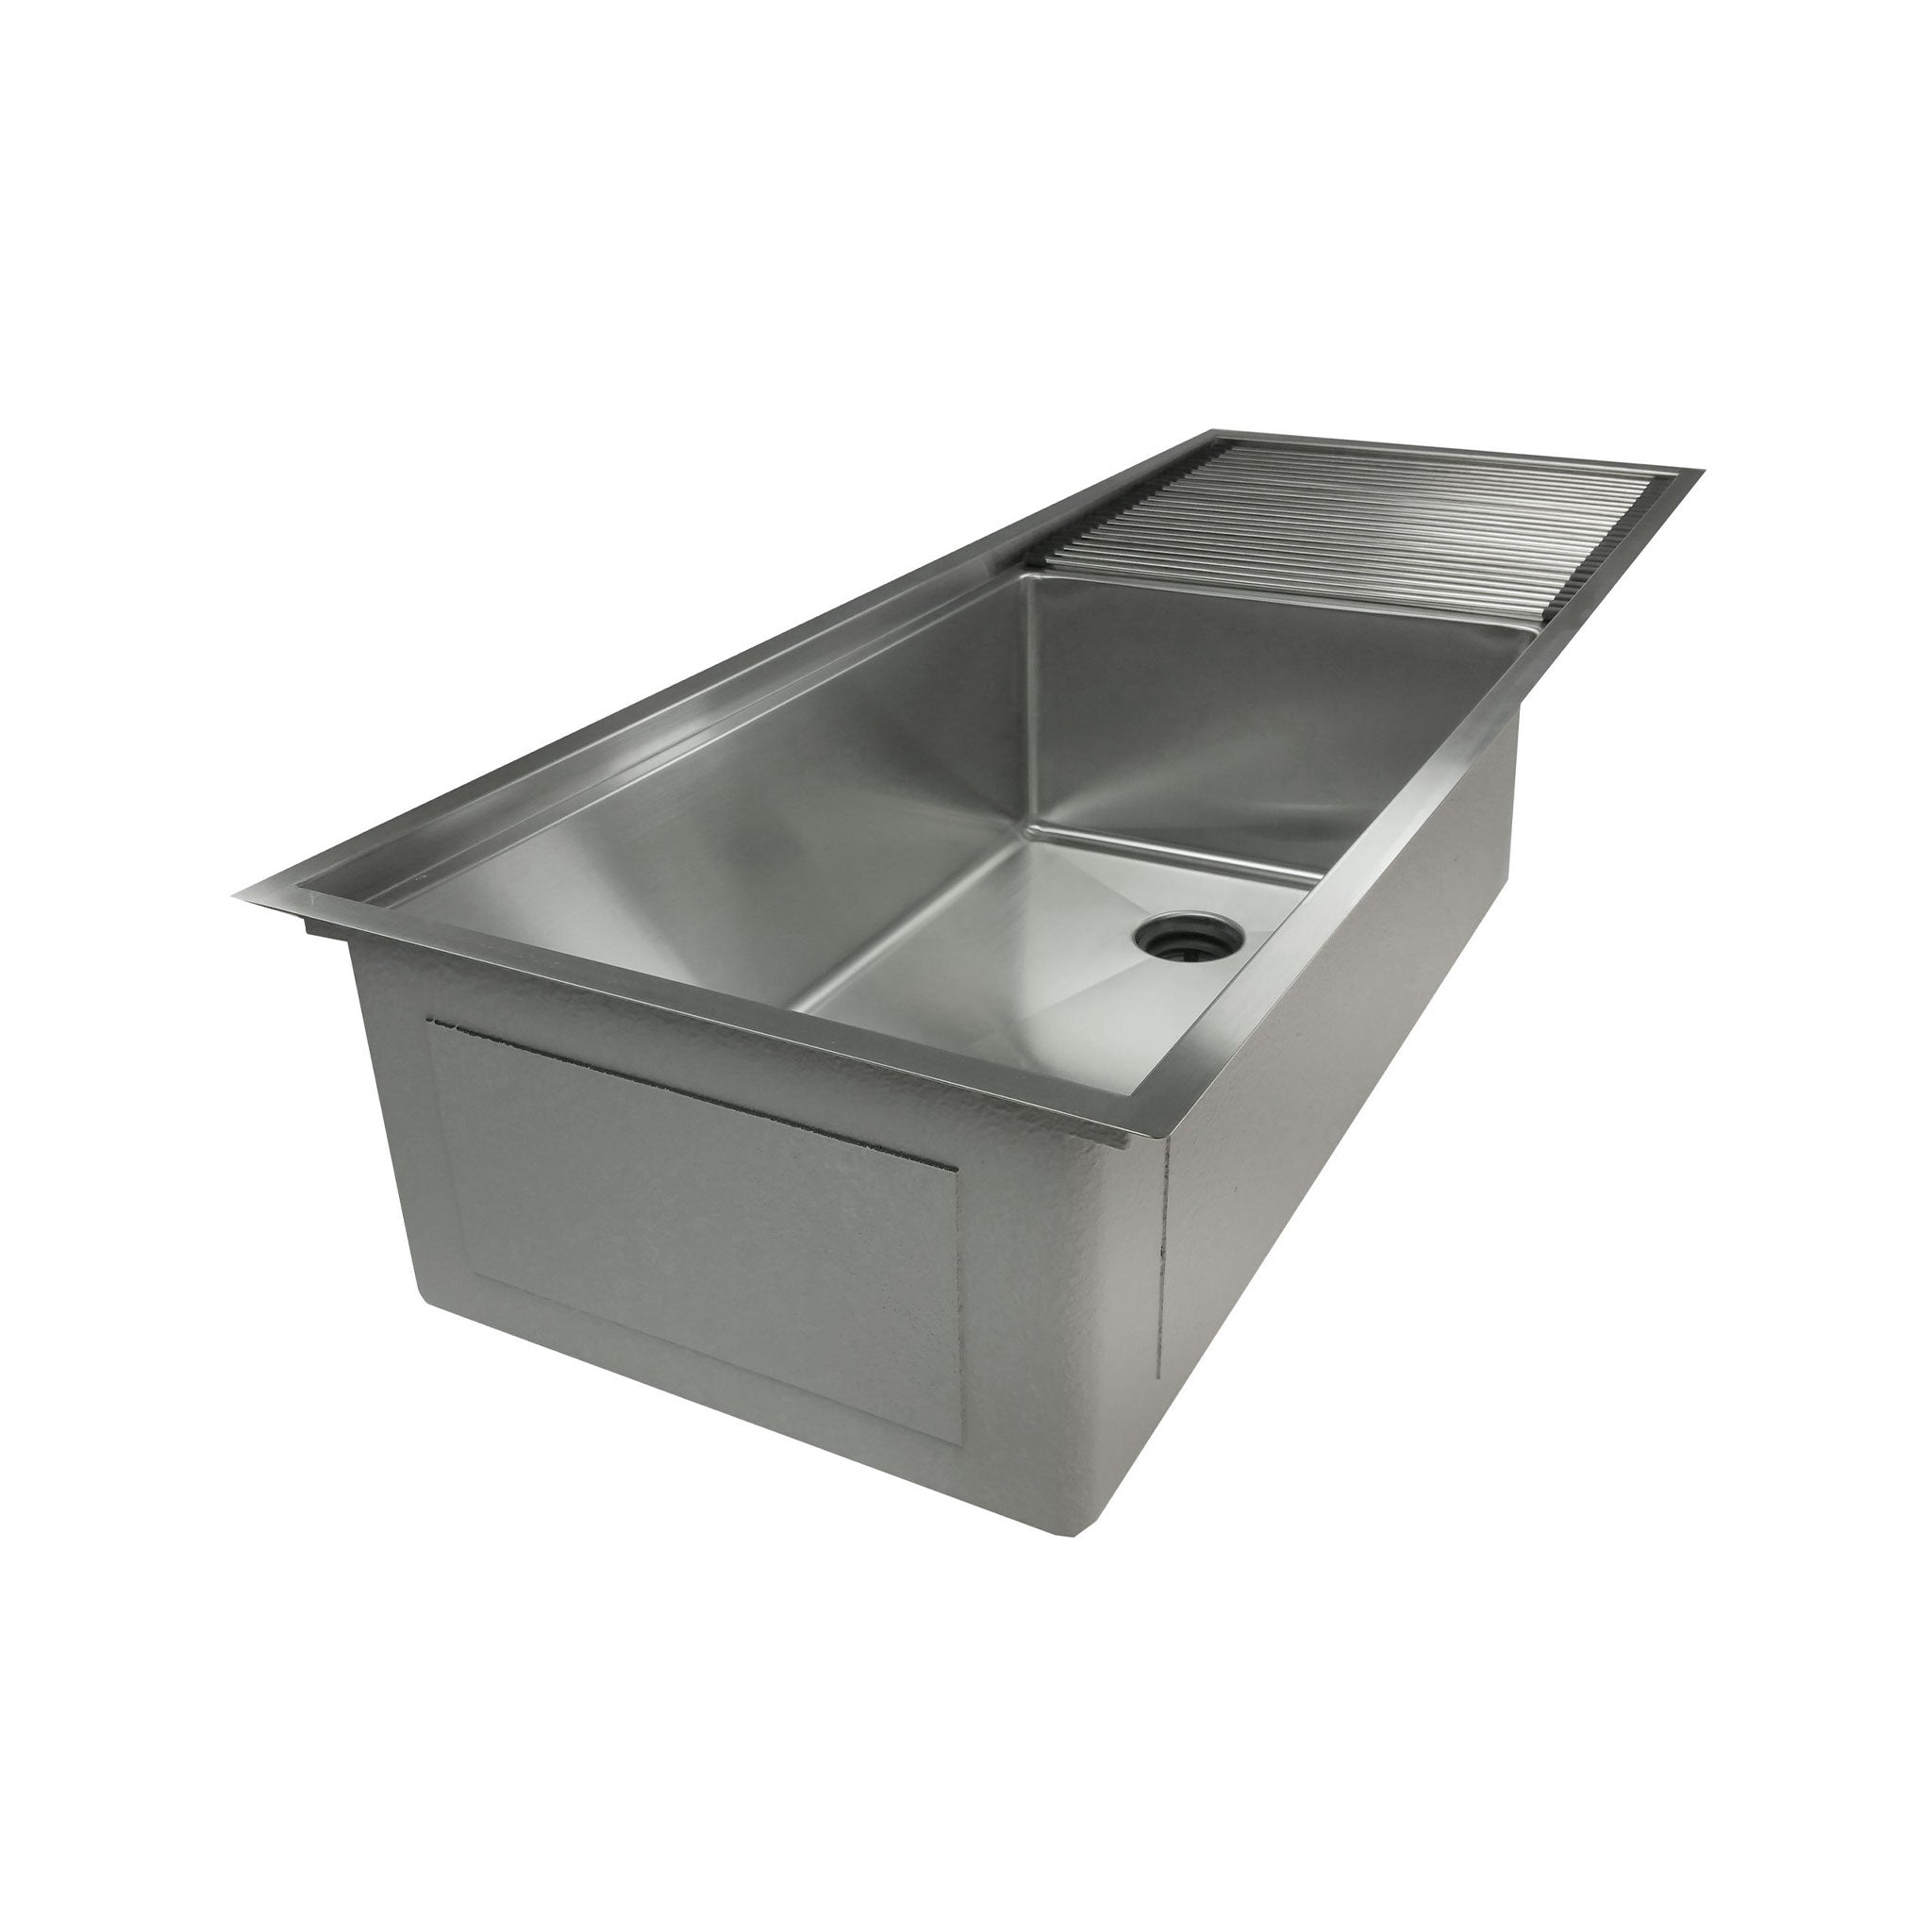 Undermount workstation kitchen sink with drainboard and center drain off to the side.